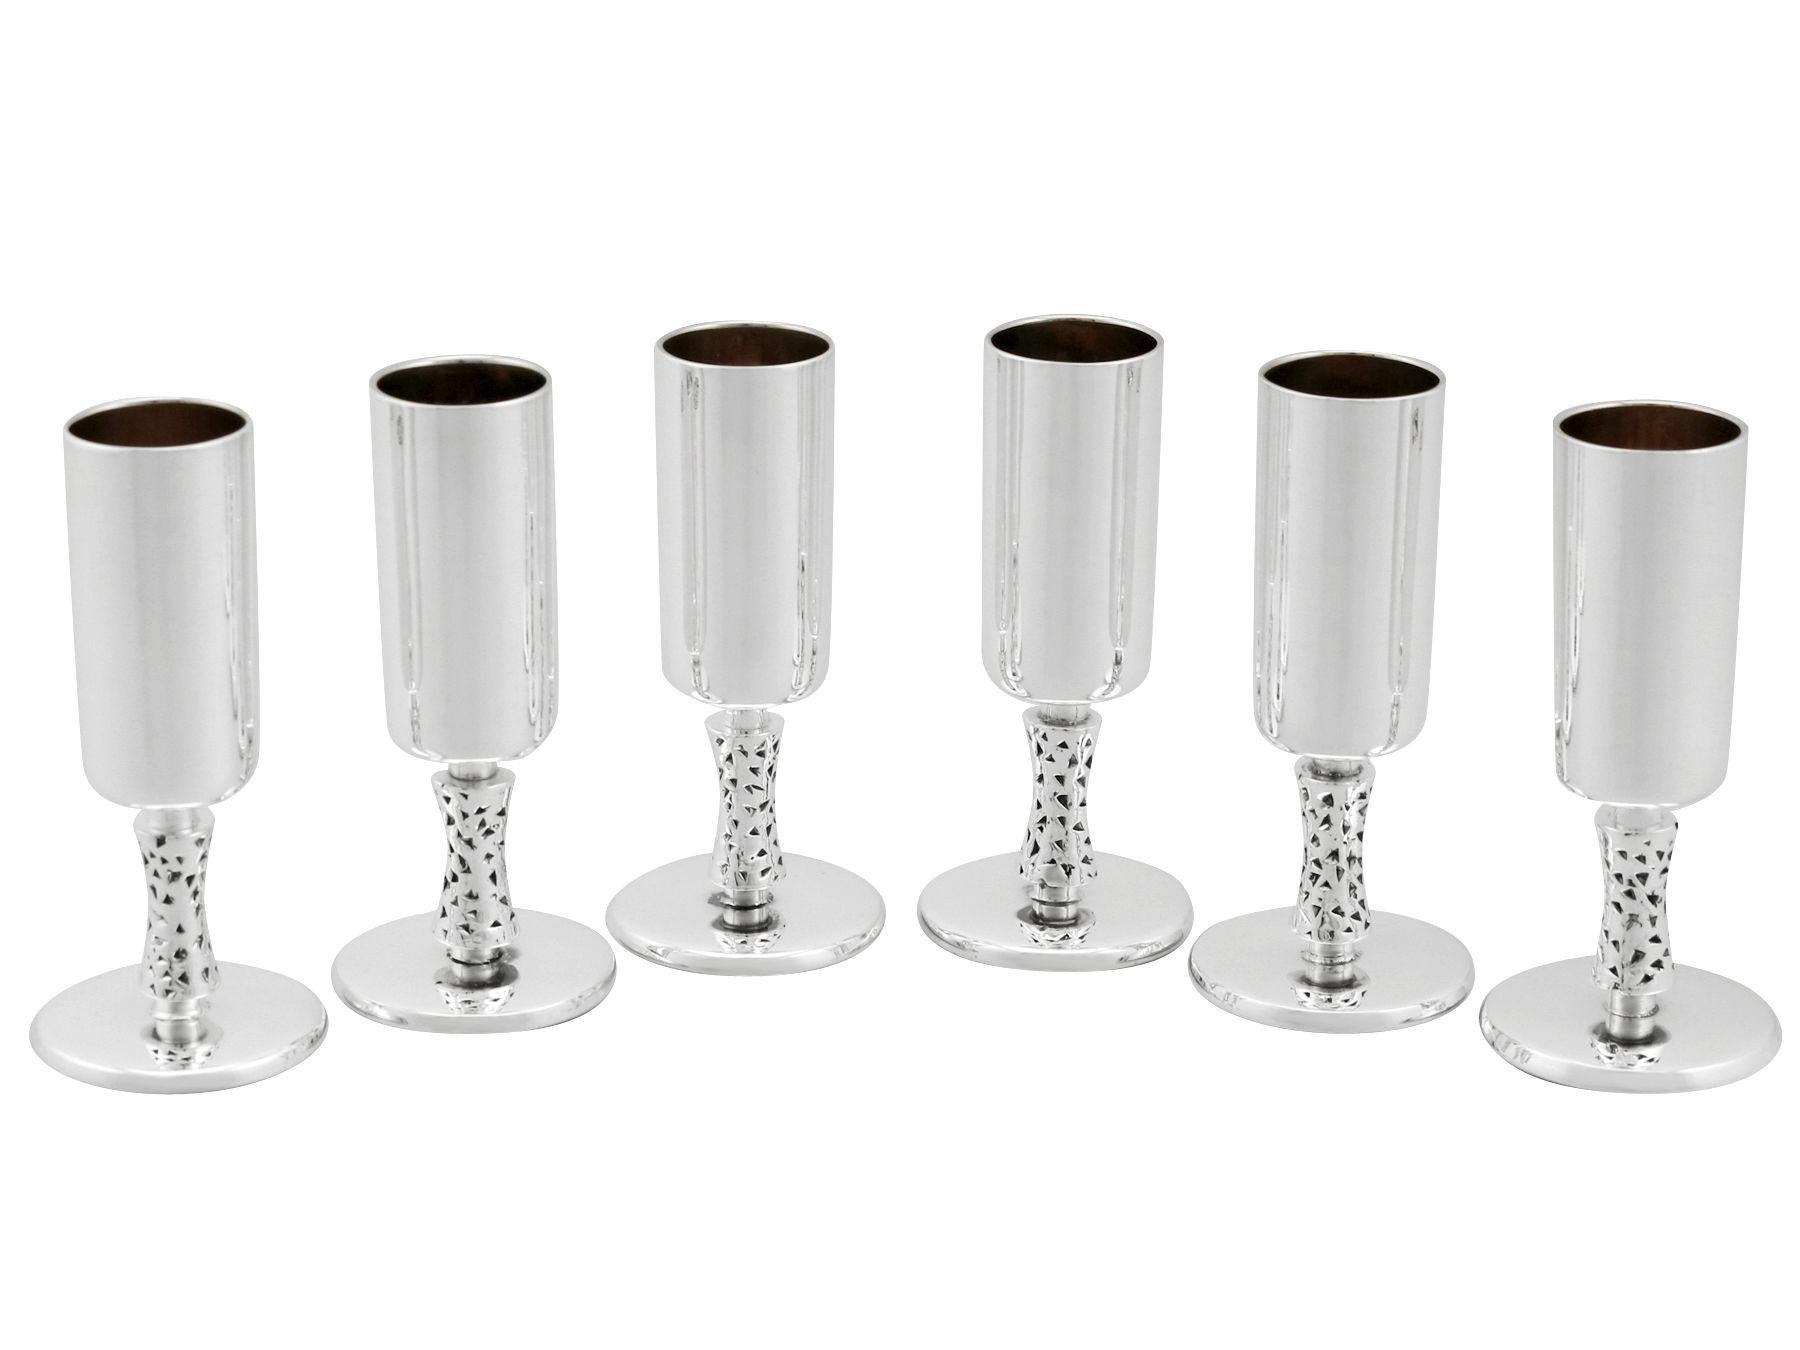 An exceptional, fine and impressive set of vintage Irish sterling silver sherry glasses - boxed; an addition to our range of wine and drink related silverware.

These exceptional vintage sterling silver sherry glasses/goblets have a plain